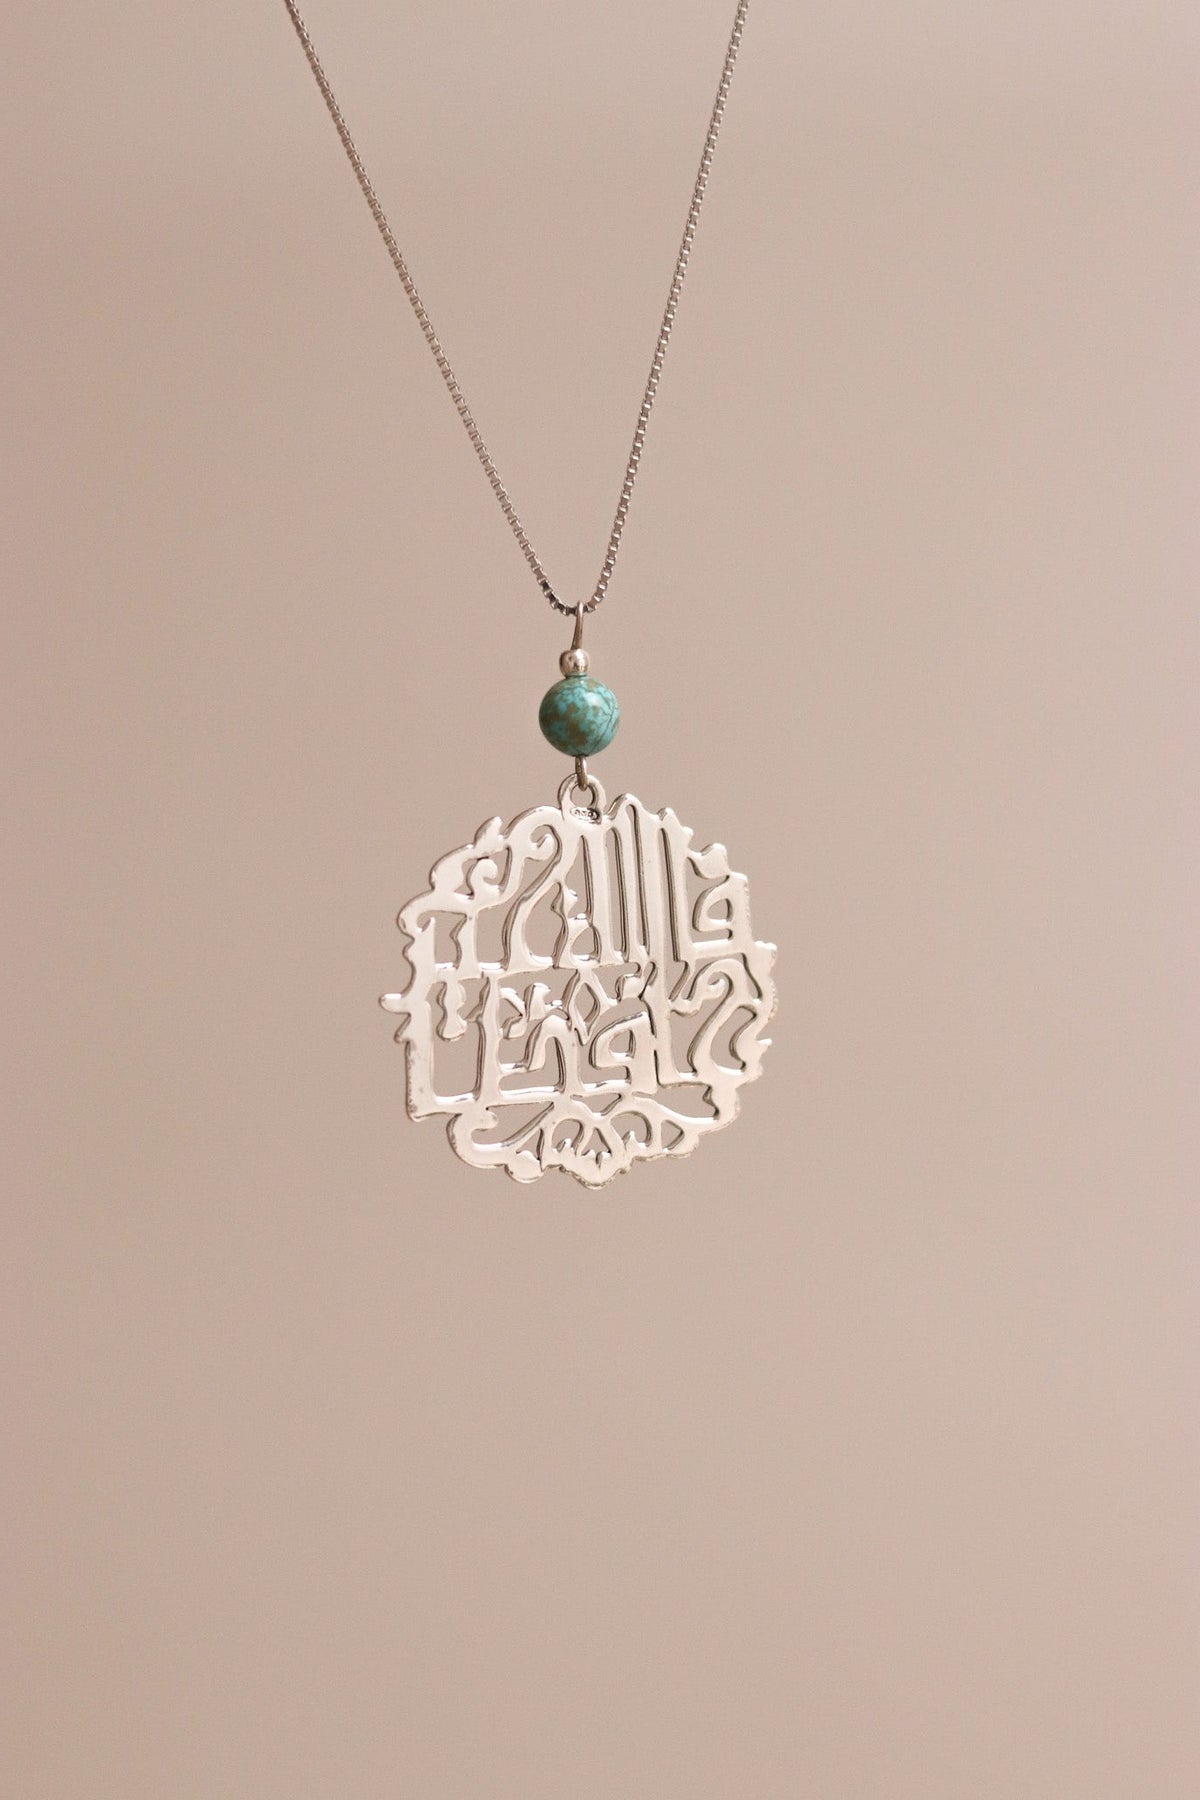 Car mirror chain with a verse from "سورة يوسف" with turquoise stone